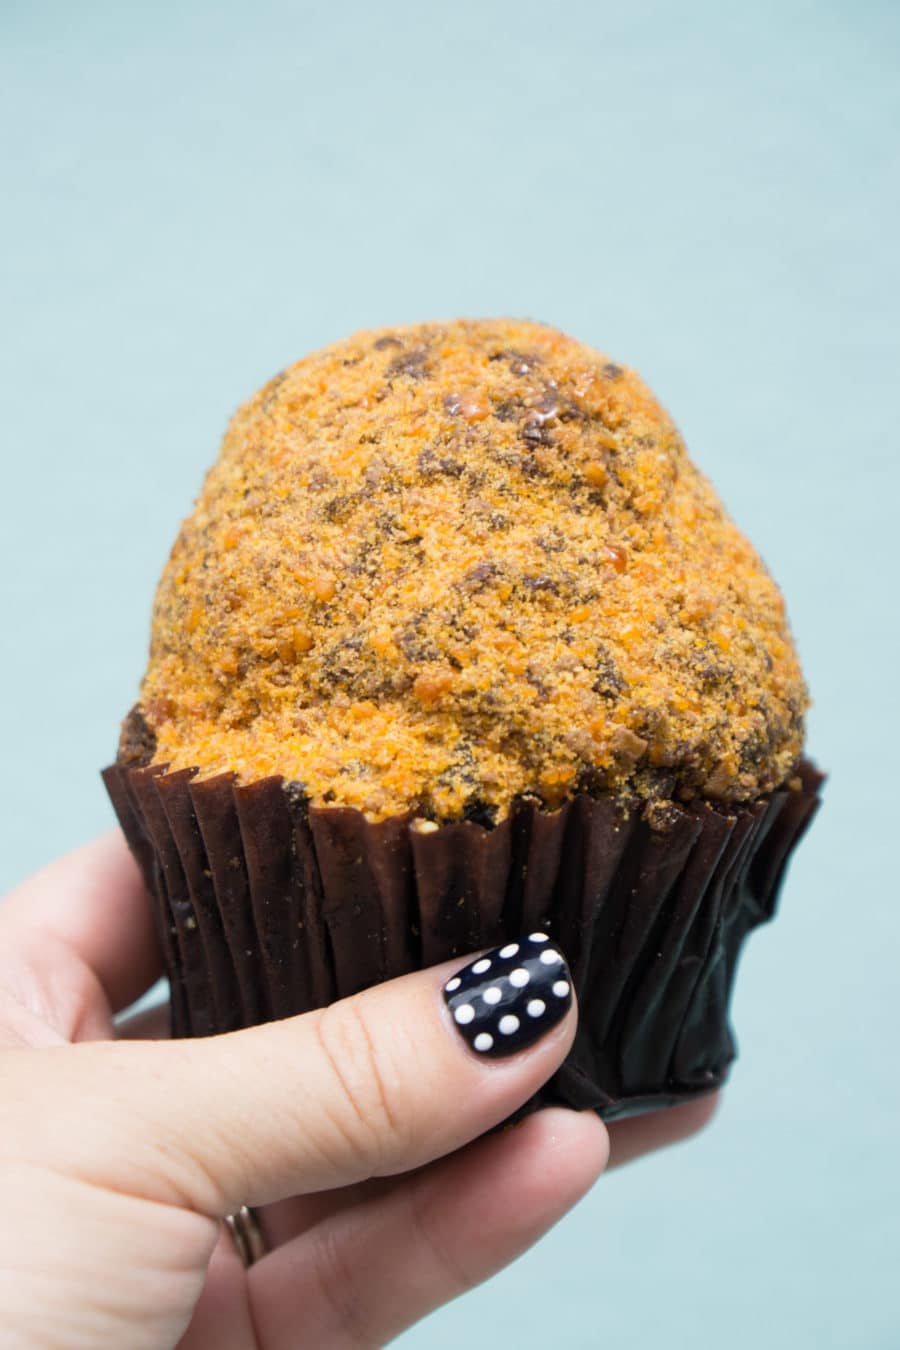 Butterfinger Crunch Cupcake and other Disney snacks